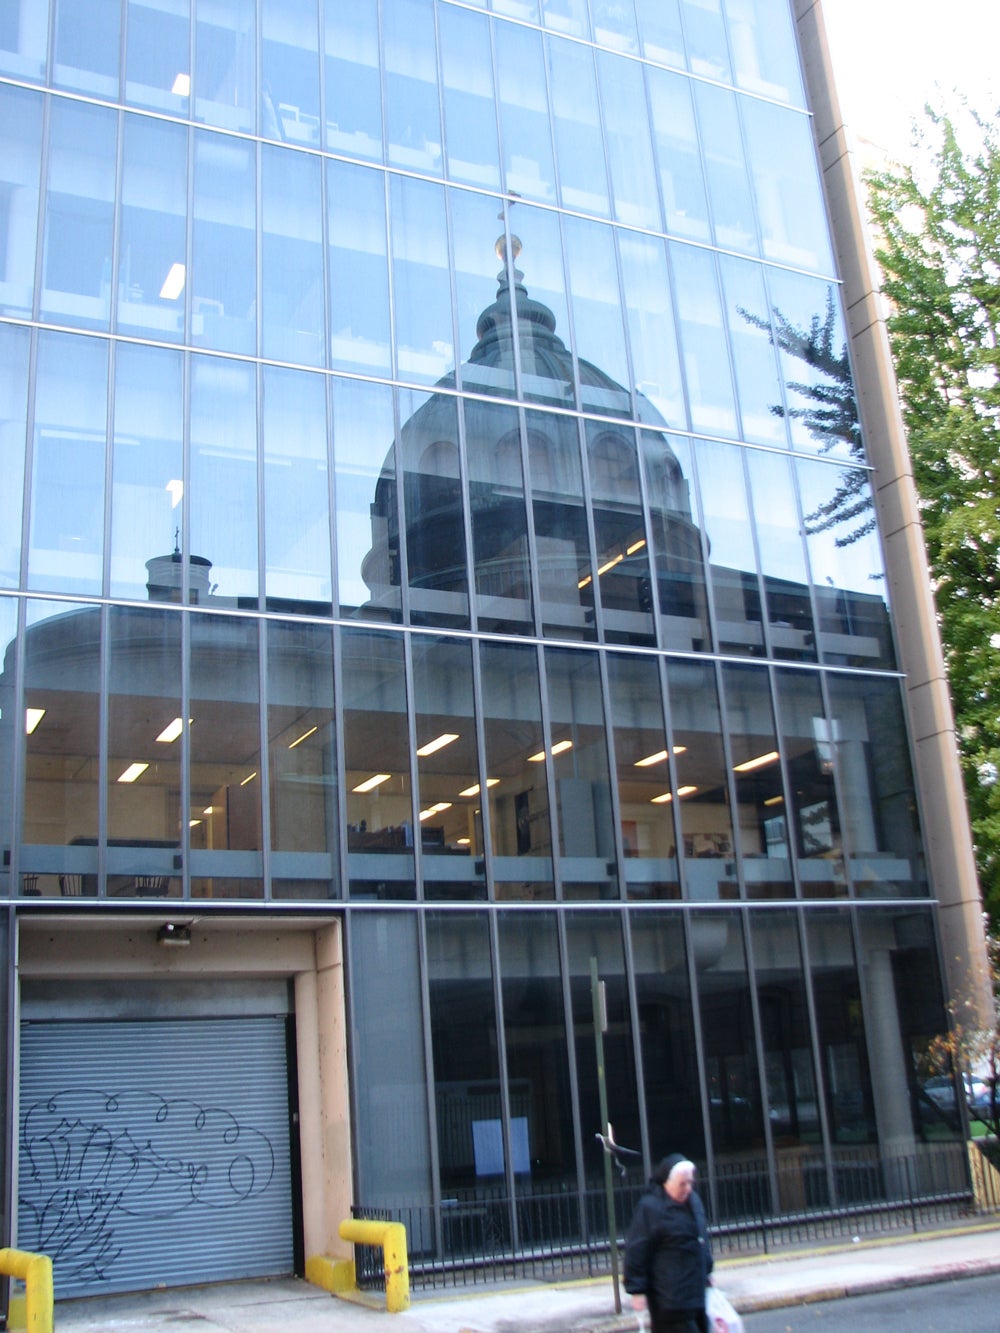 The glass wall on the north side reflects the Cathedral Basilica.